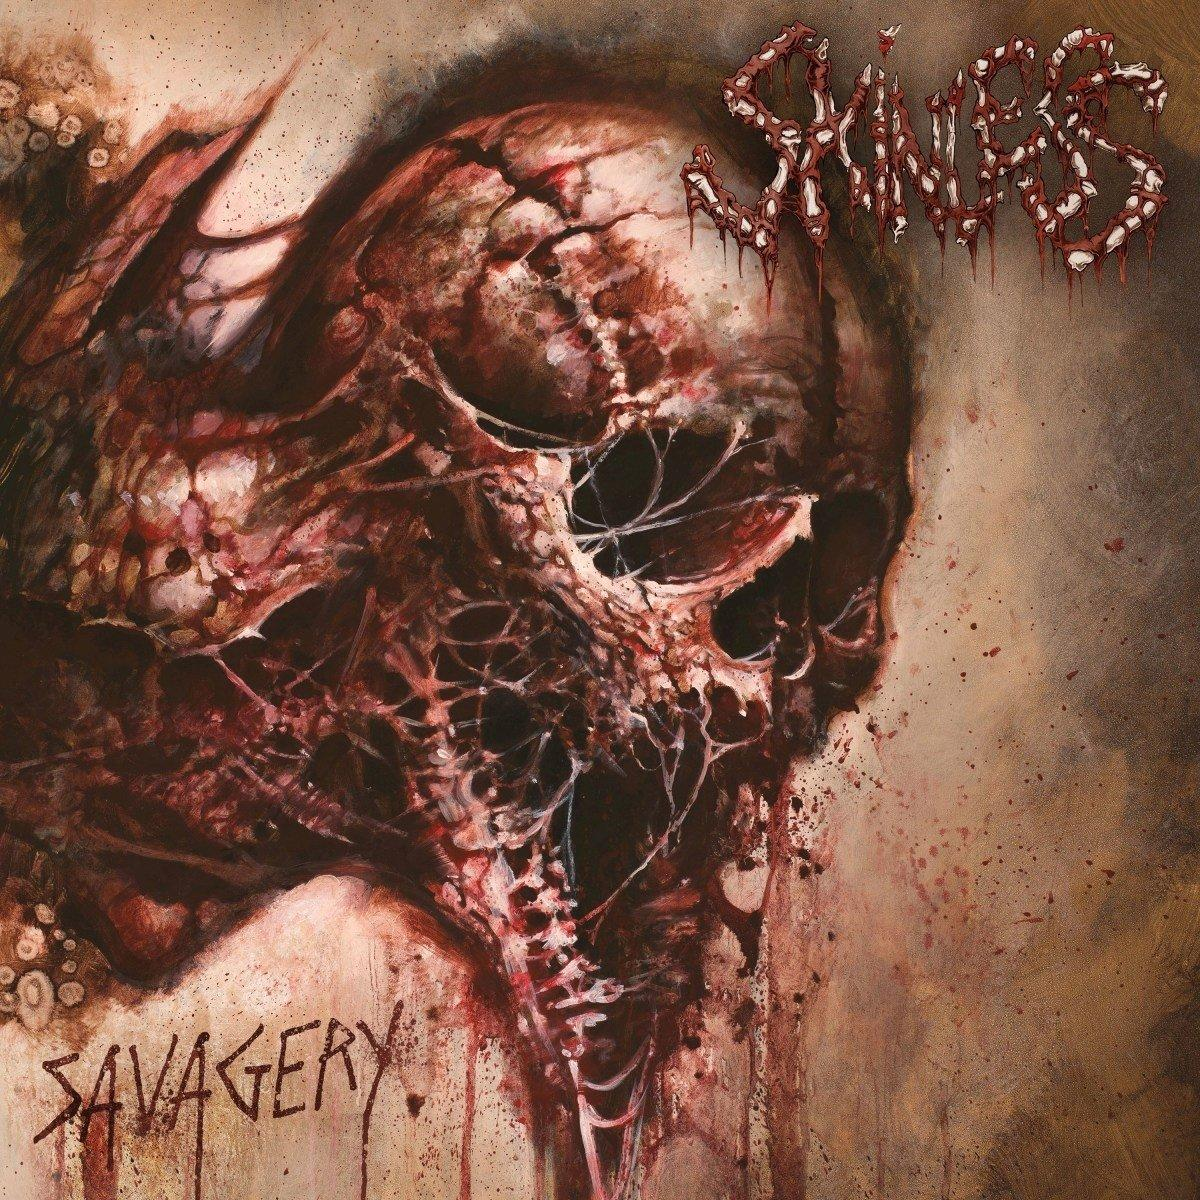 Skinless - Savagery - (CD)